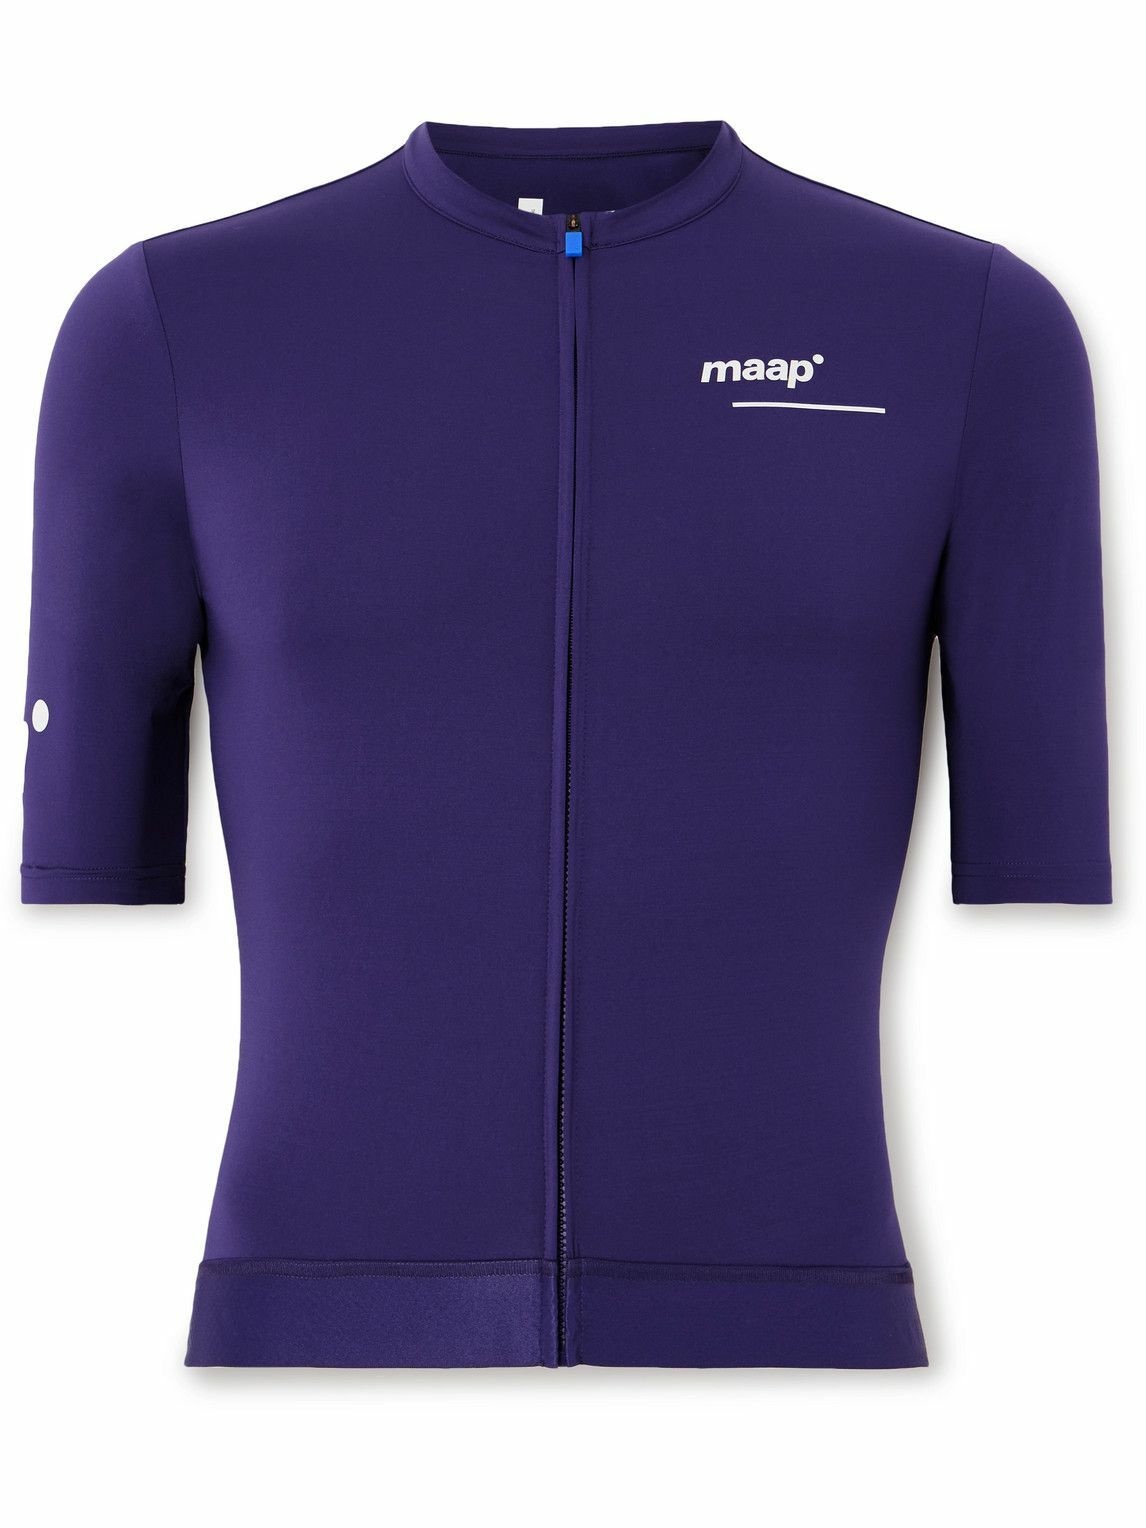 MAAP - Training Logo-Print Recycled Cycling Jersey - Blue MAAP